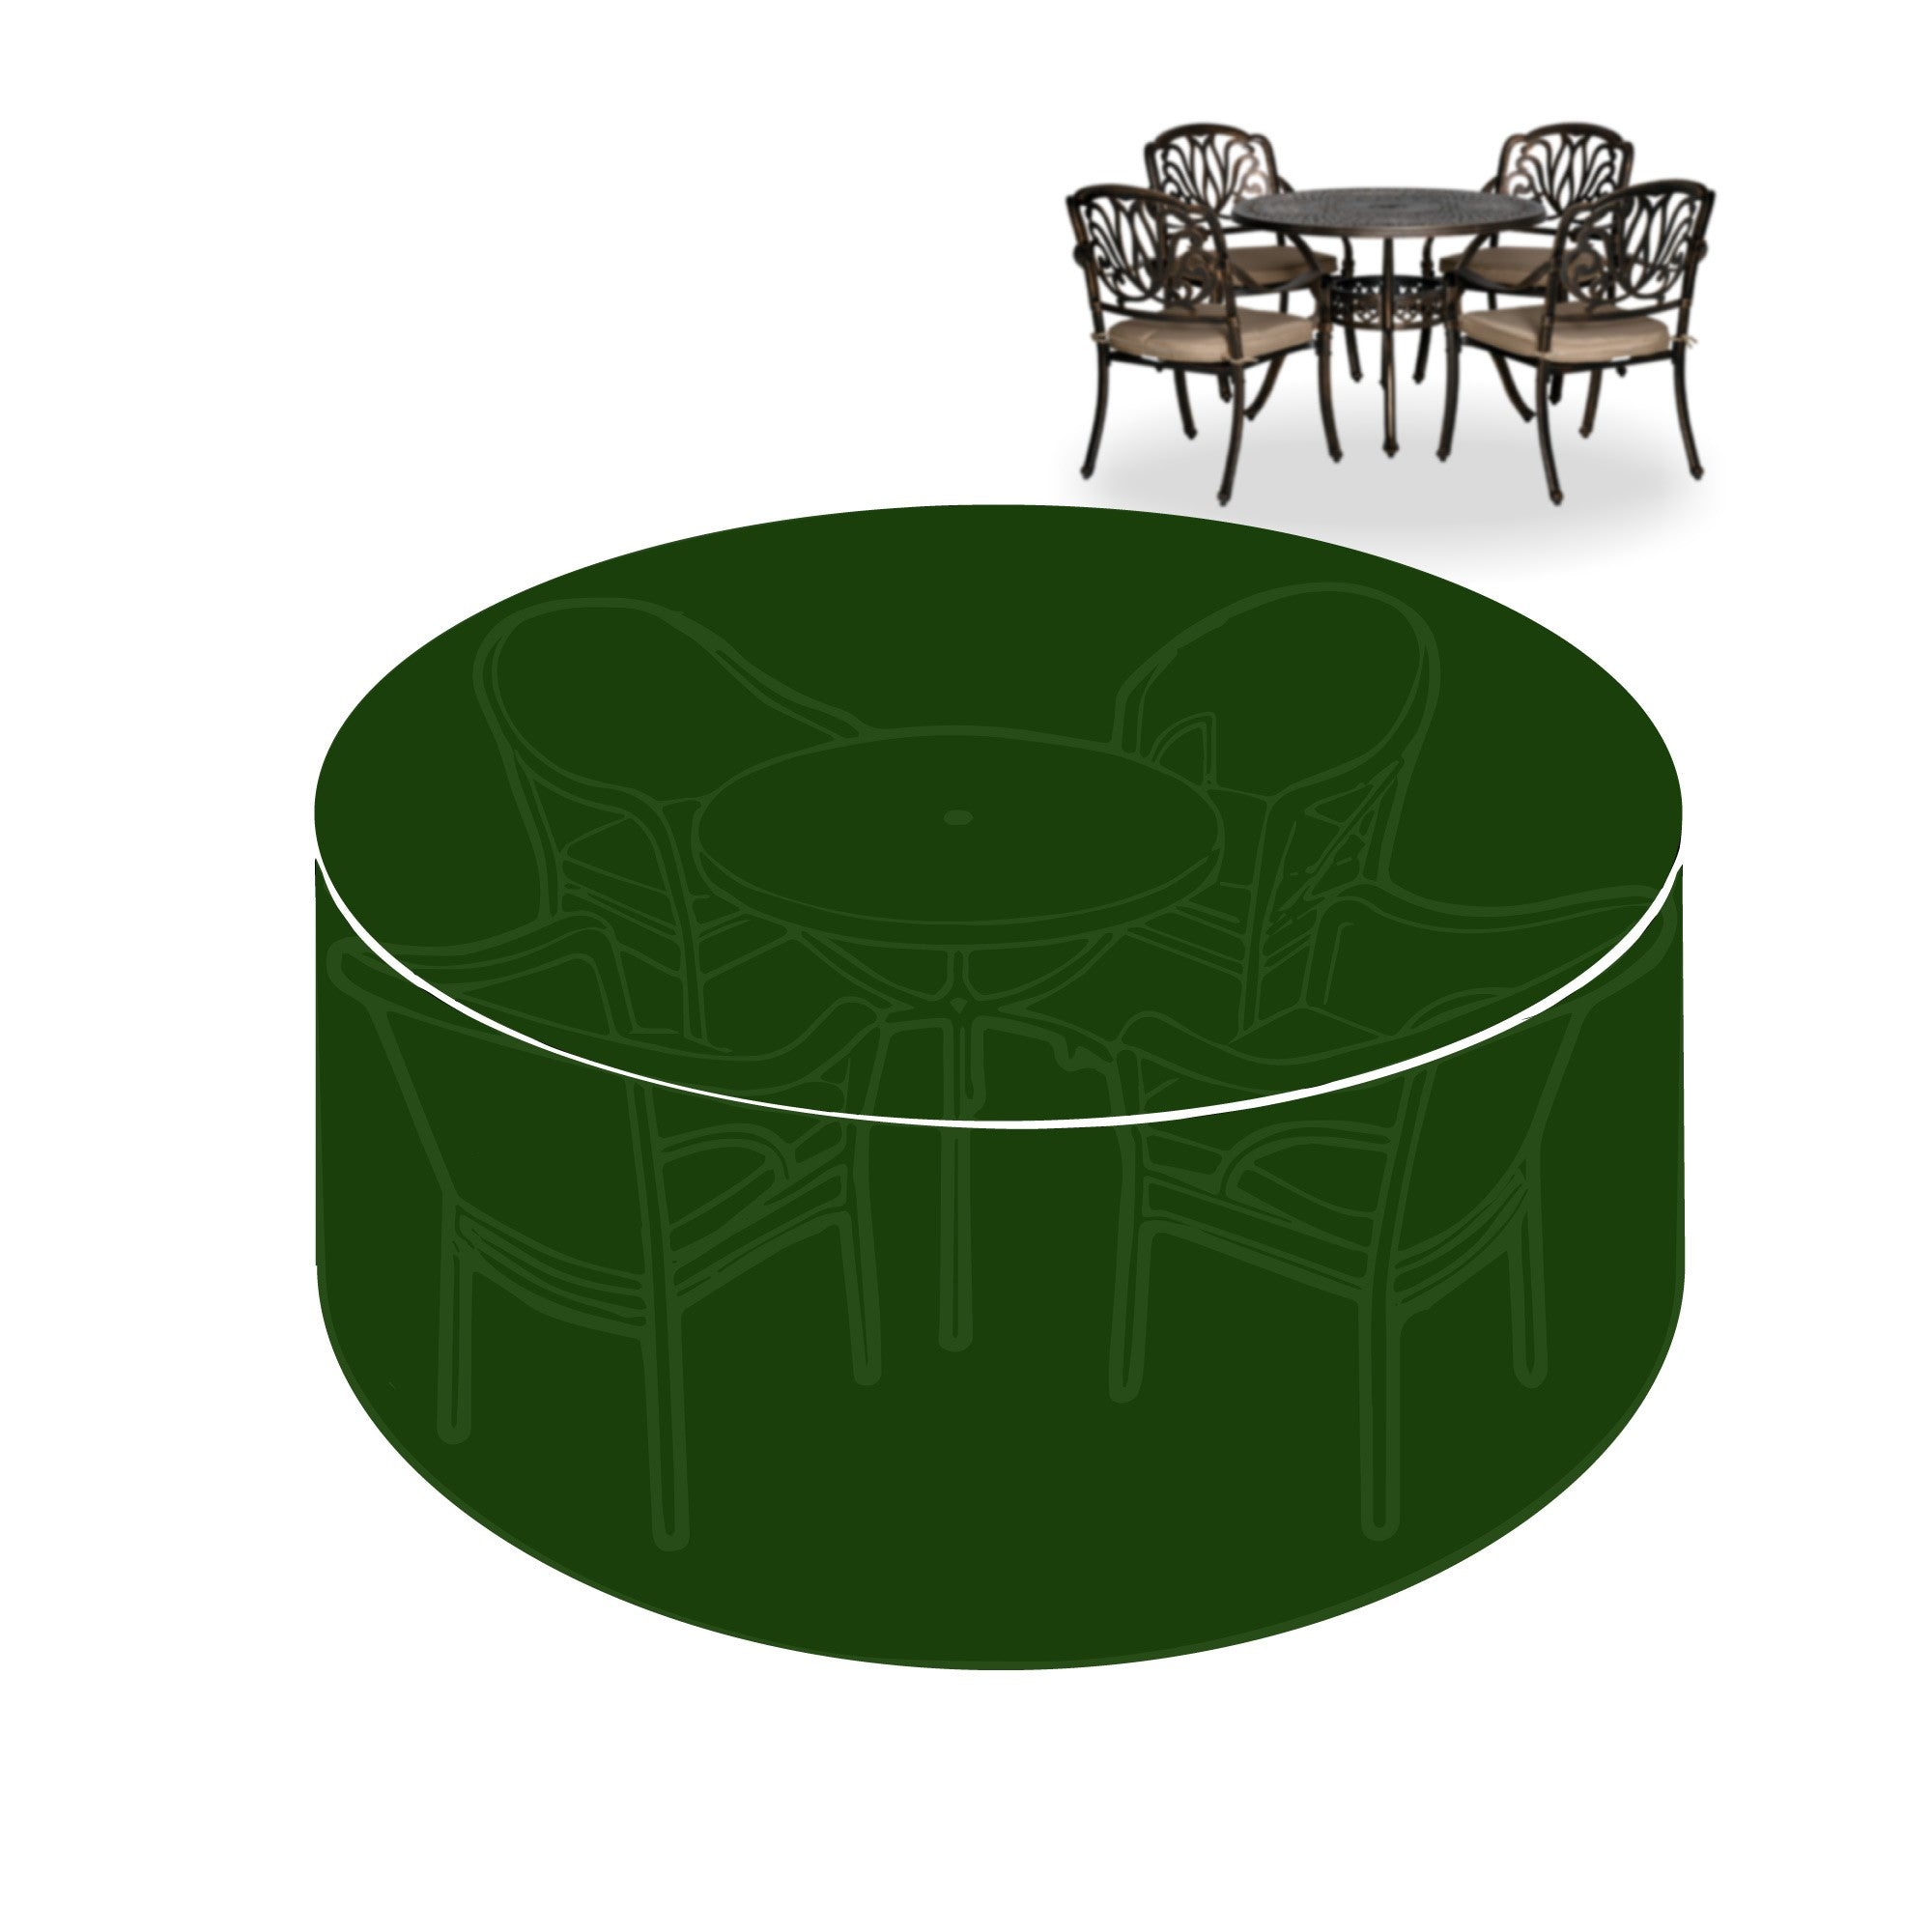 Silver & Stone Outdoor Furniture Cover for 4 Seater Round 205 x 89cm Green  | TJ Hughes